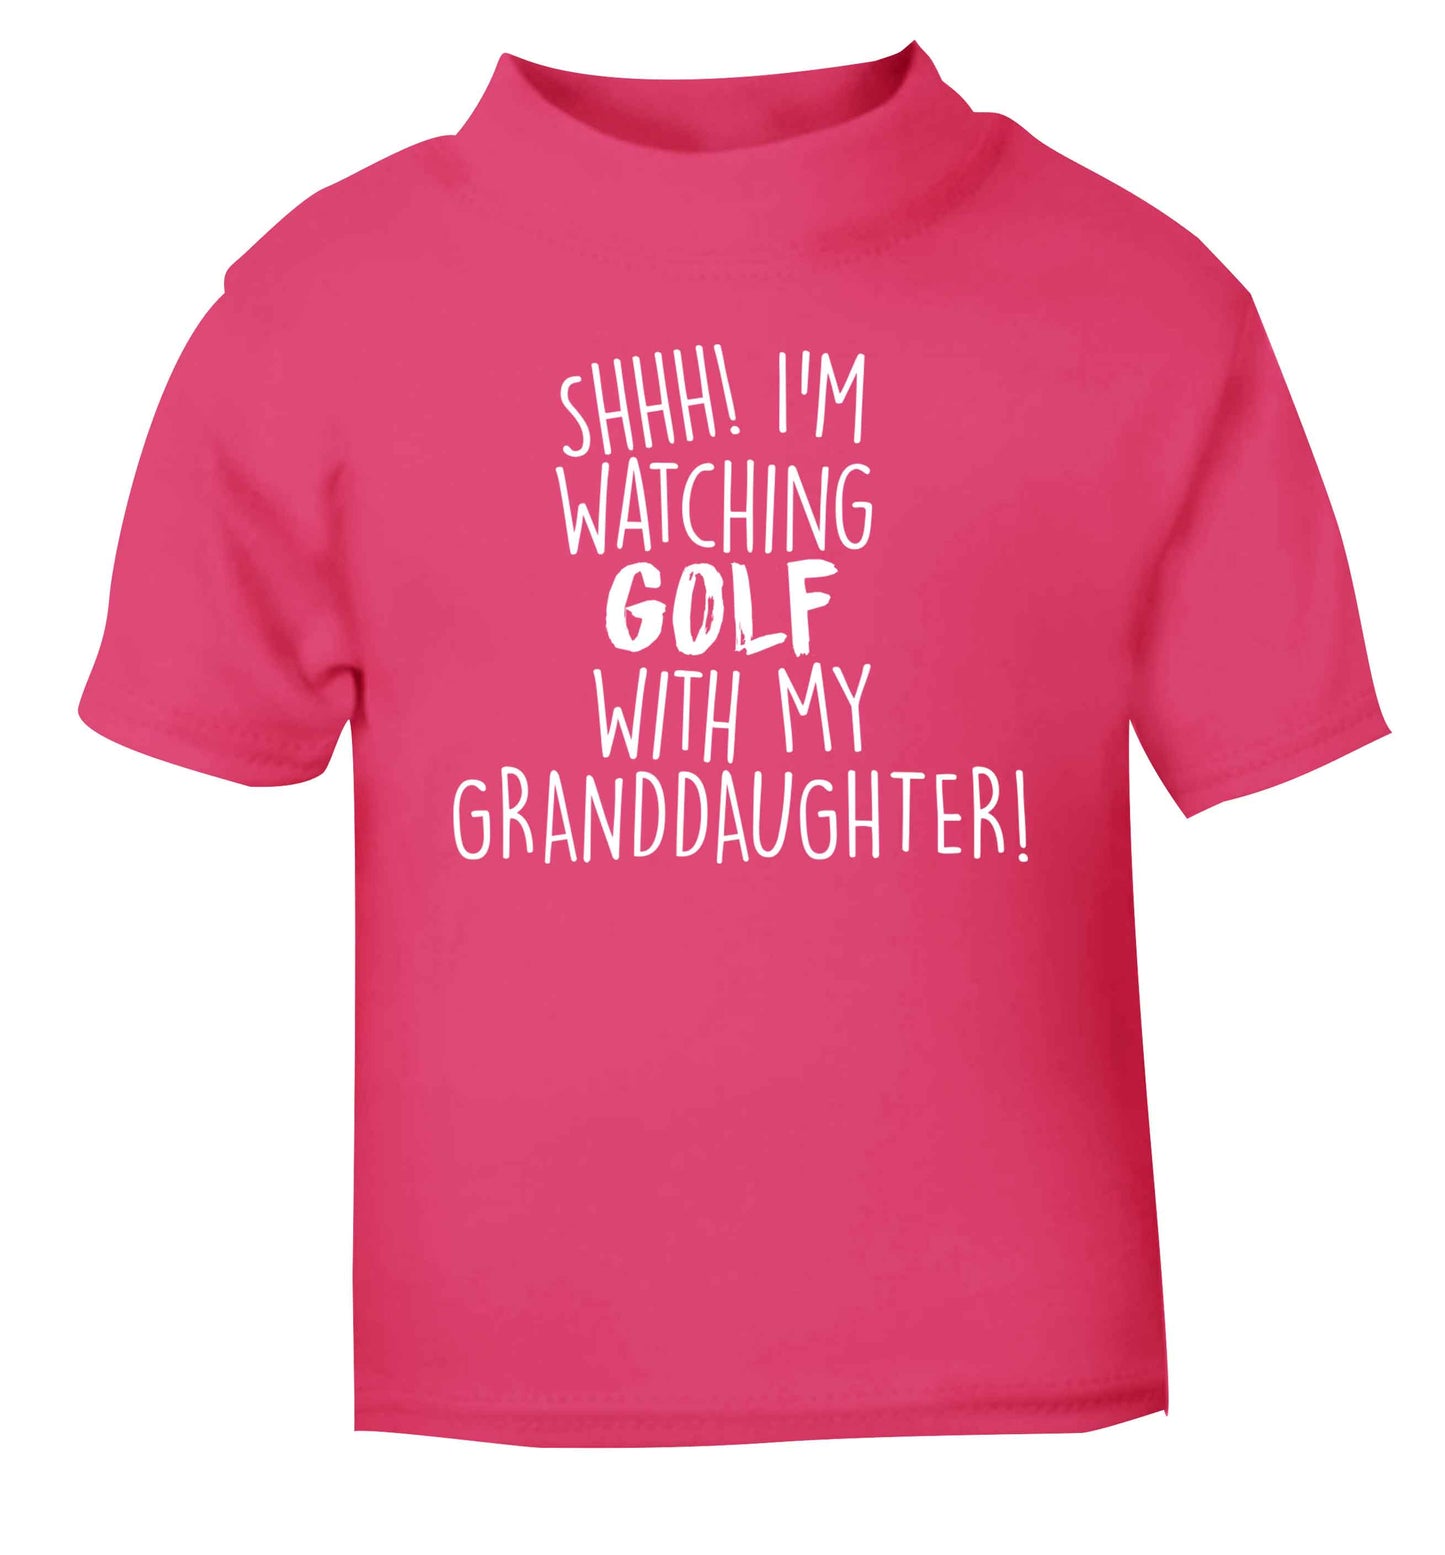 Shh I'm watching golf with my granddaughter pink Baby Toddler Tshirt 2 Years